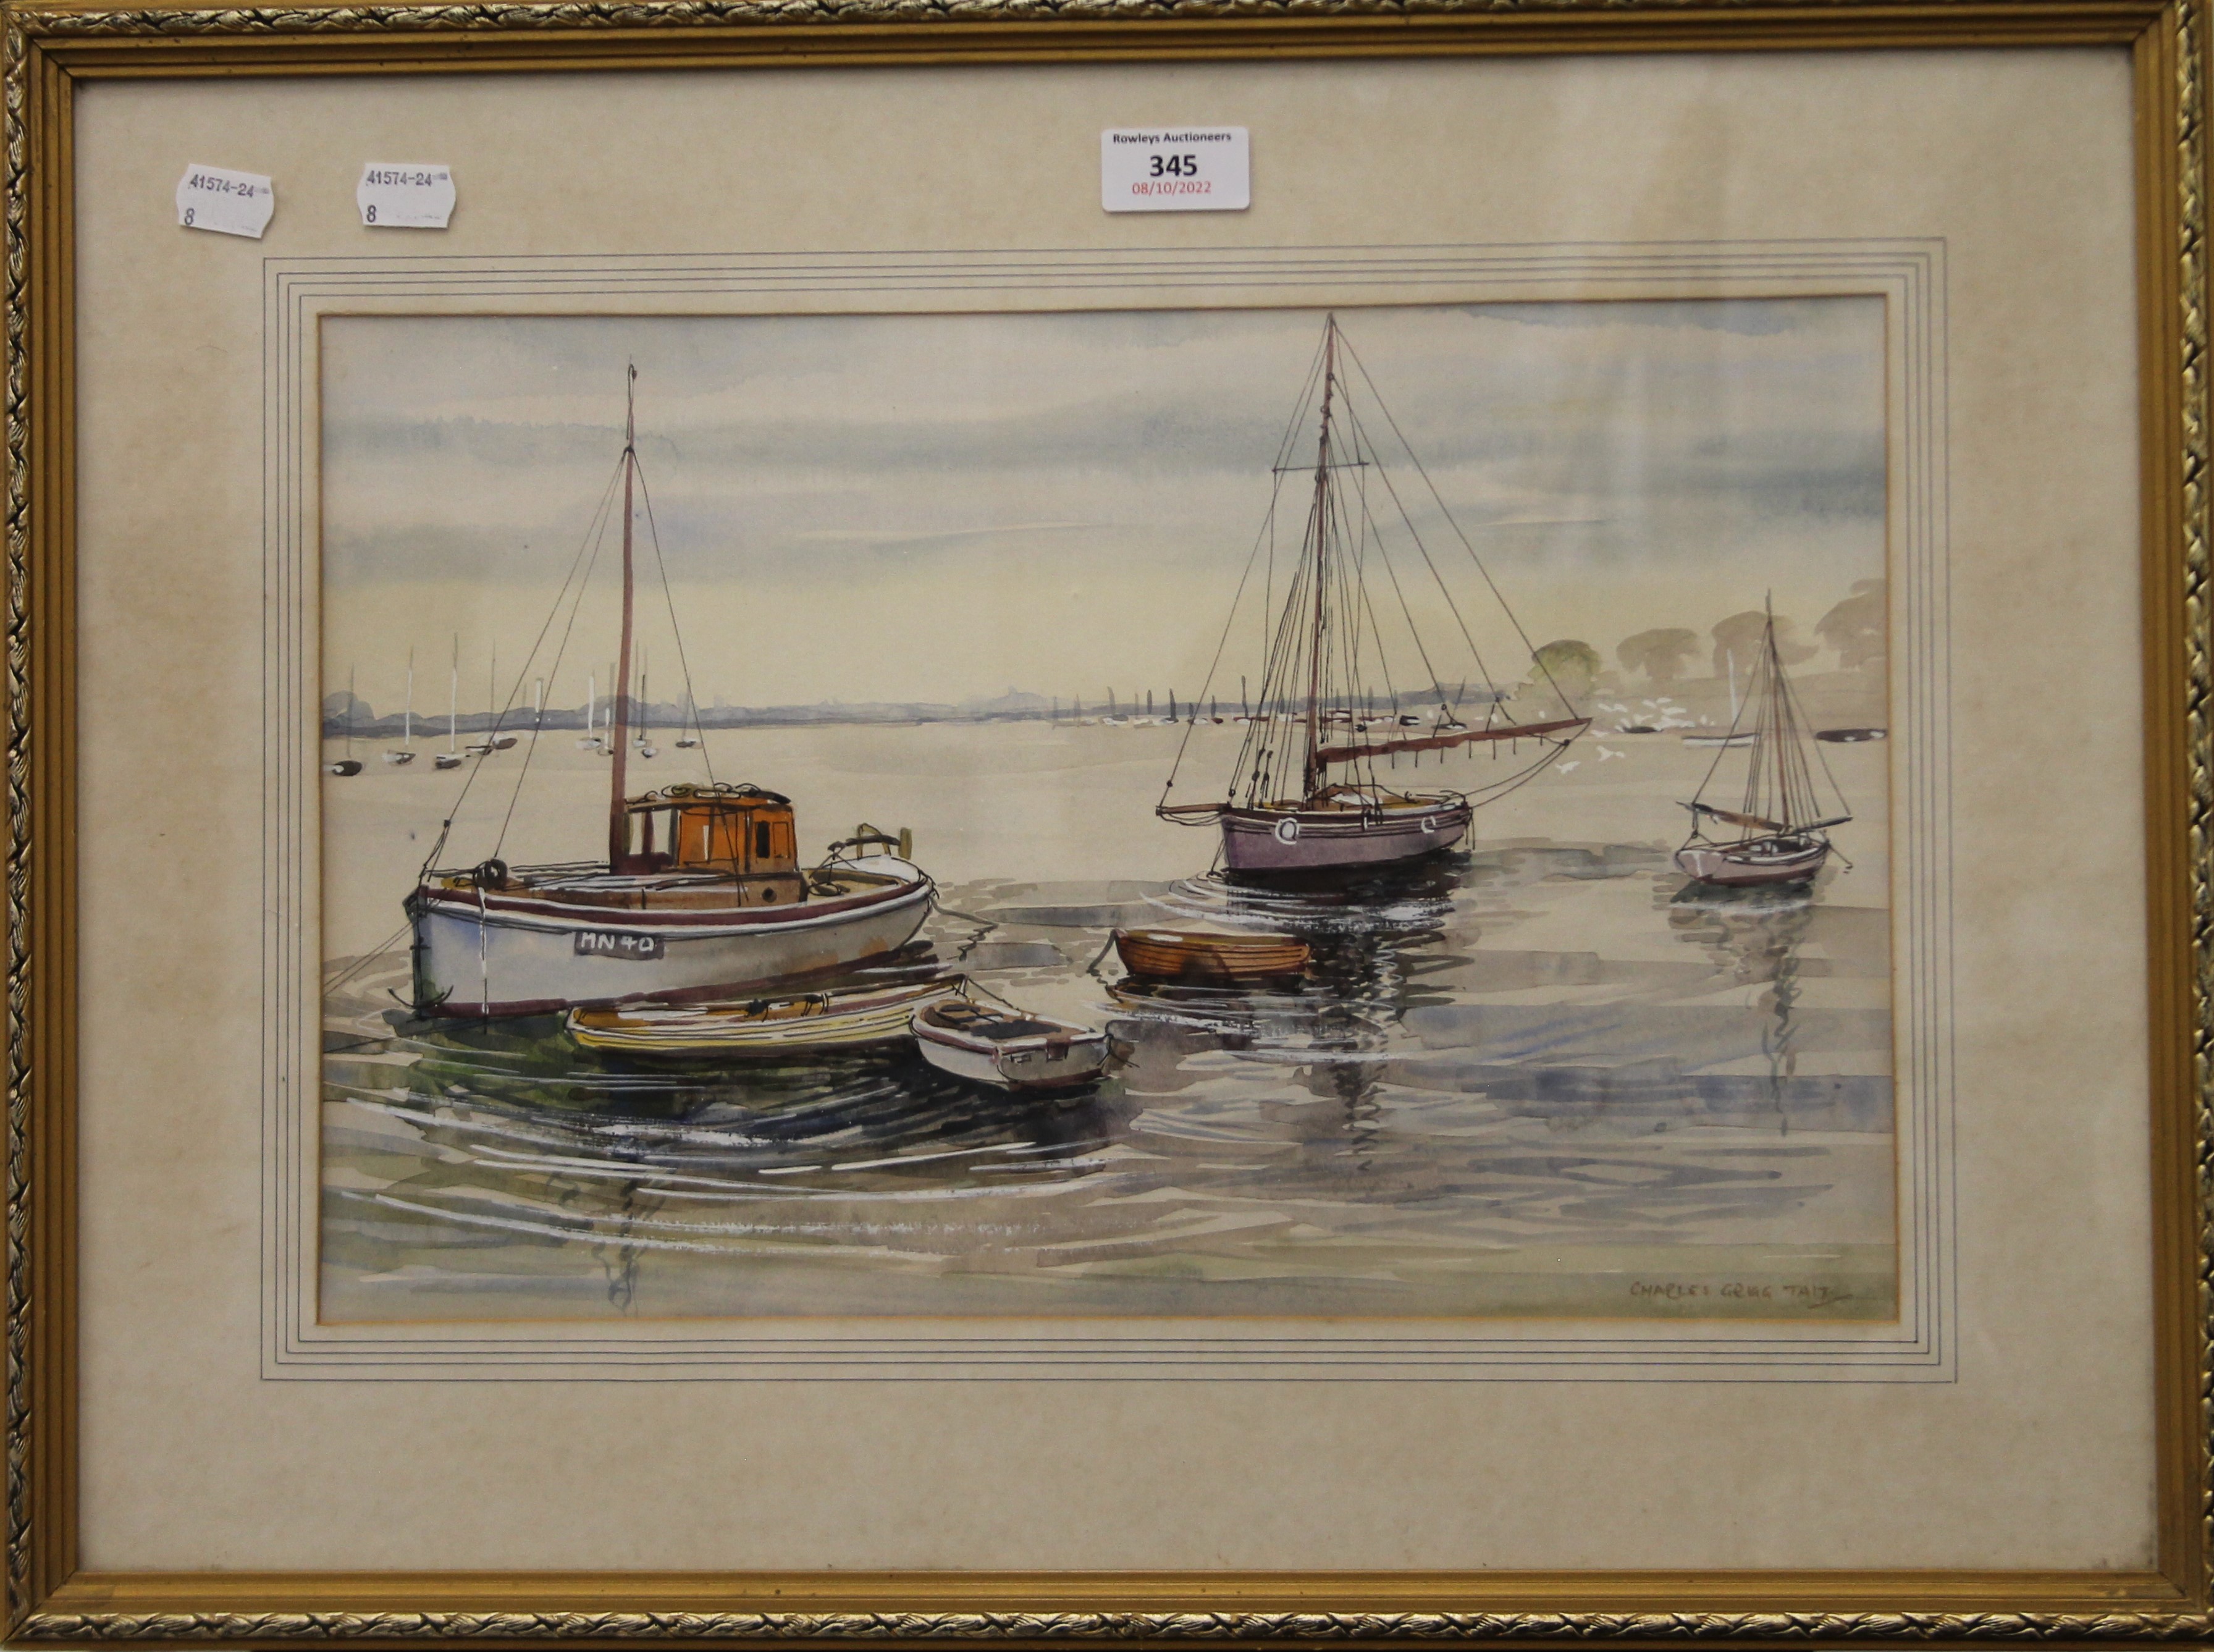 CHARLES GRIGG TAIT (1915-1996), Maldon, watercolour, framed and glazed. 40 x 26 cm. - Image 3 of 4